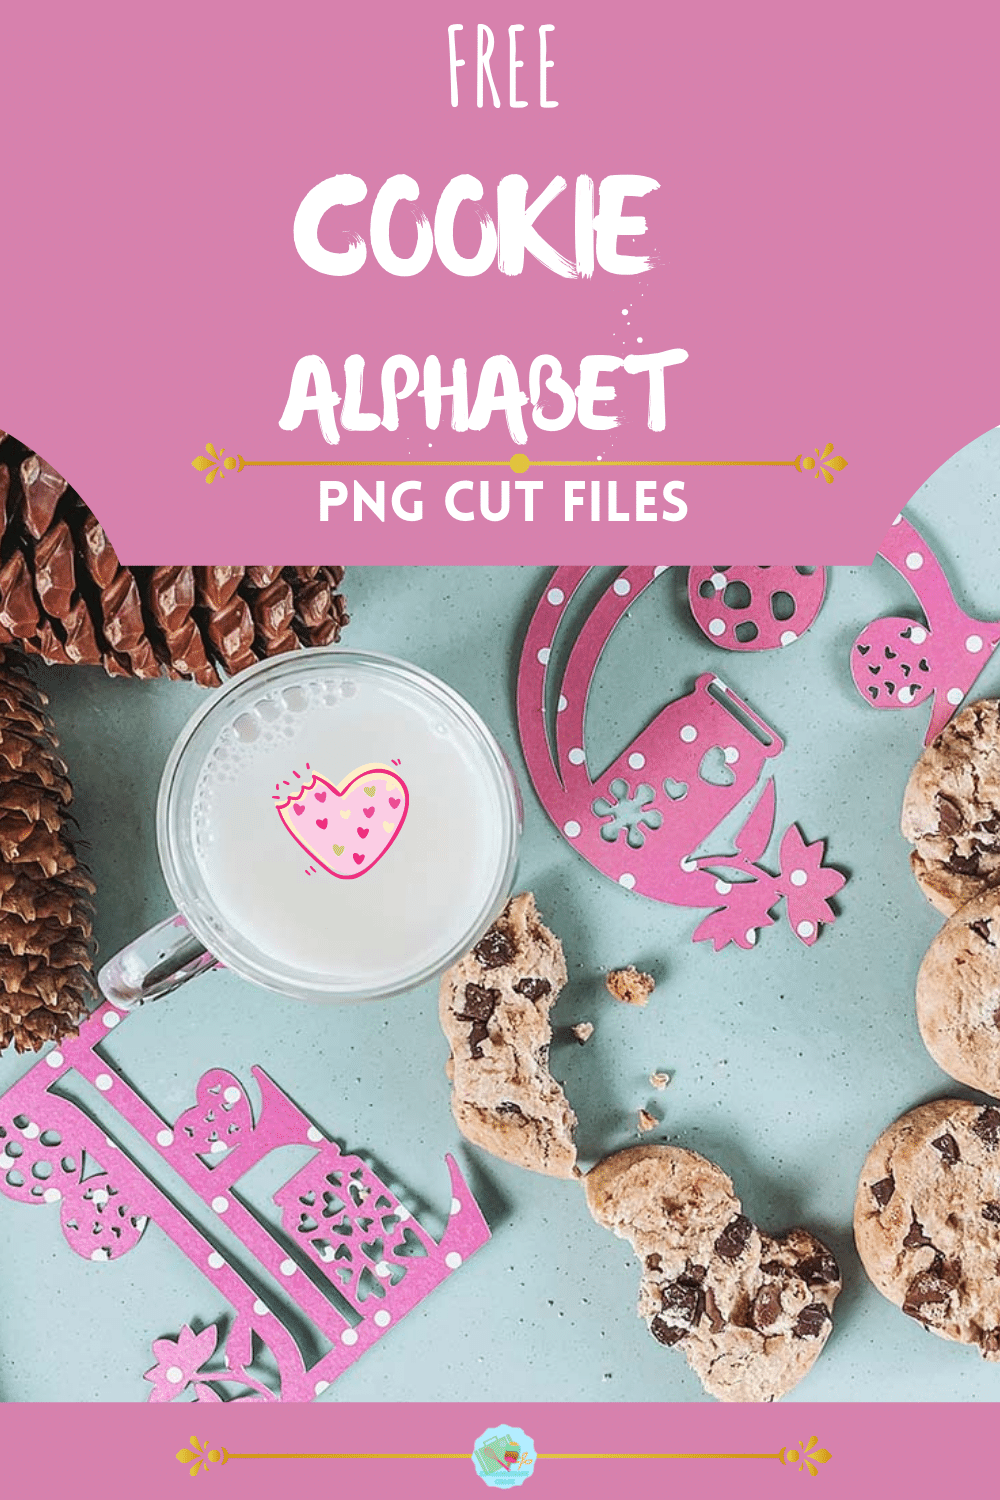 Free Cookie Alphabet Cut Files for Cookie themes Cricut Crafts